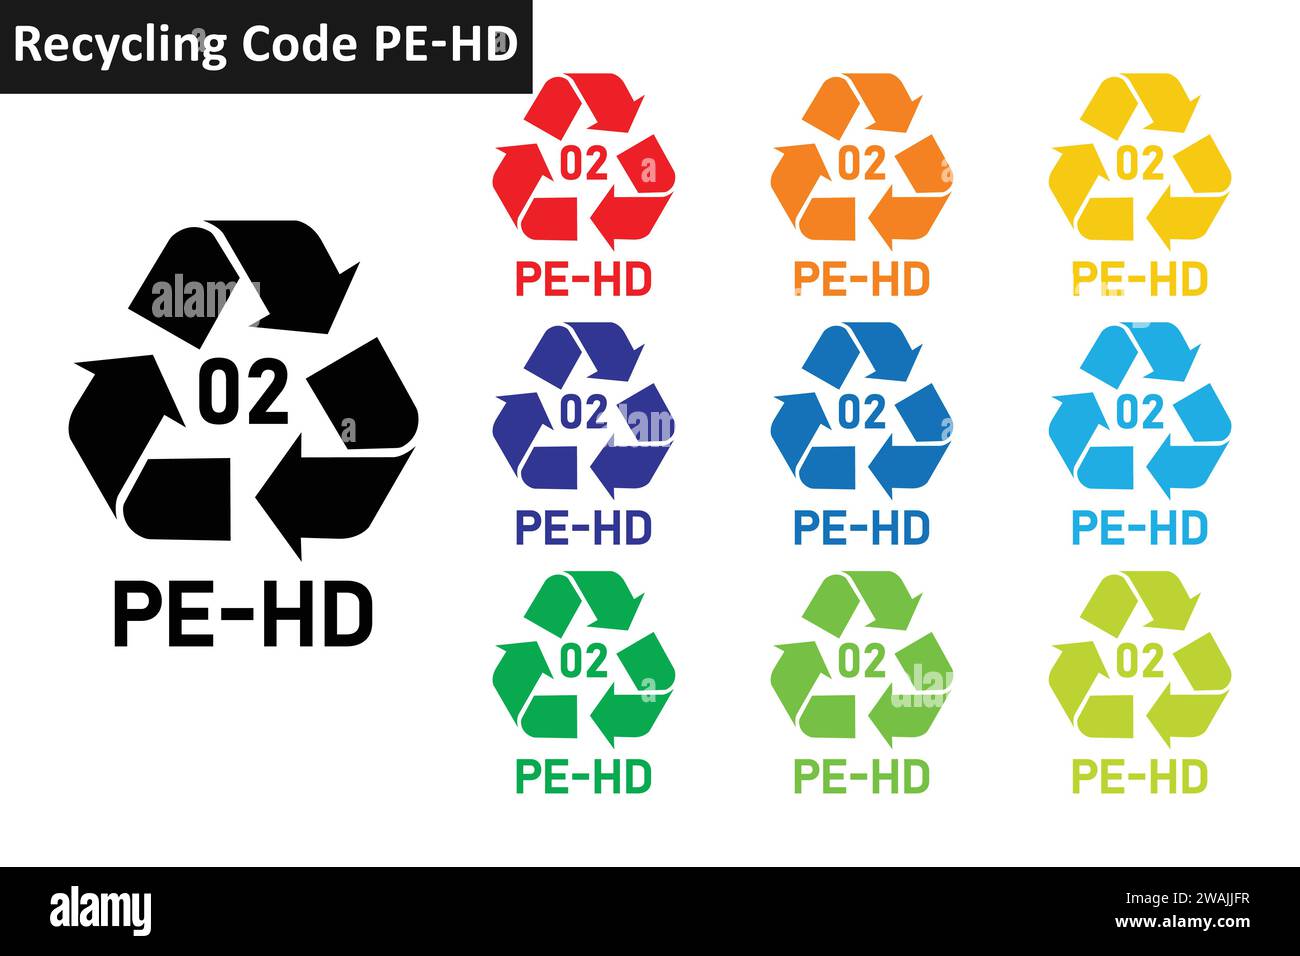 PE-HD plastic recycling code icon set. Mobius Strip plastic recycling symbols 02 PE-HD. Plastic recycling code 02 icon collection in ten colors. Stock Vector